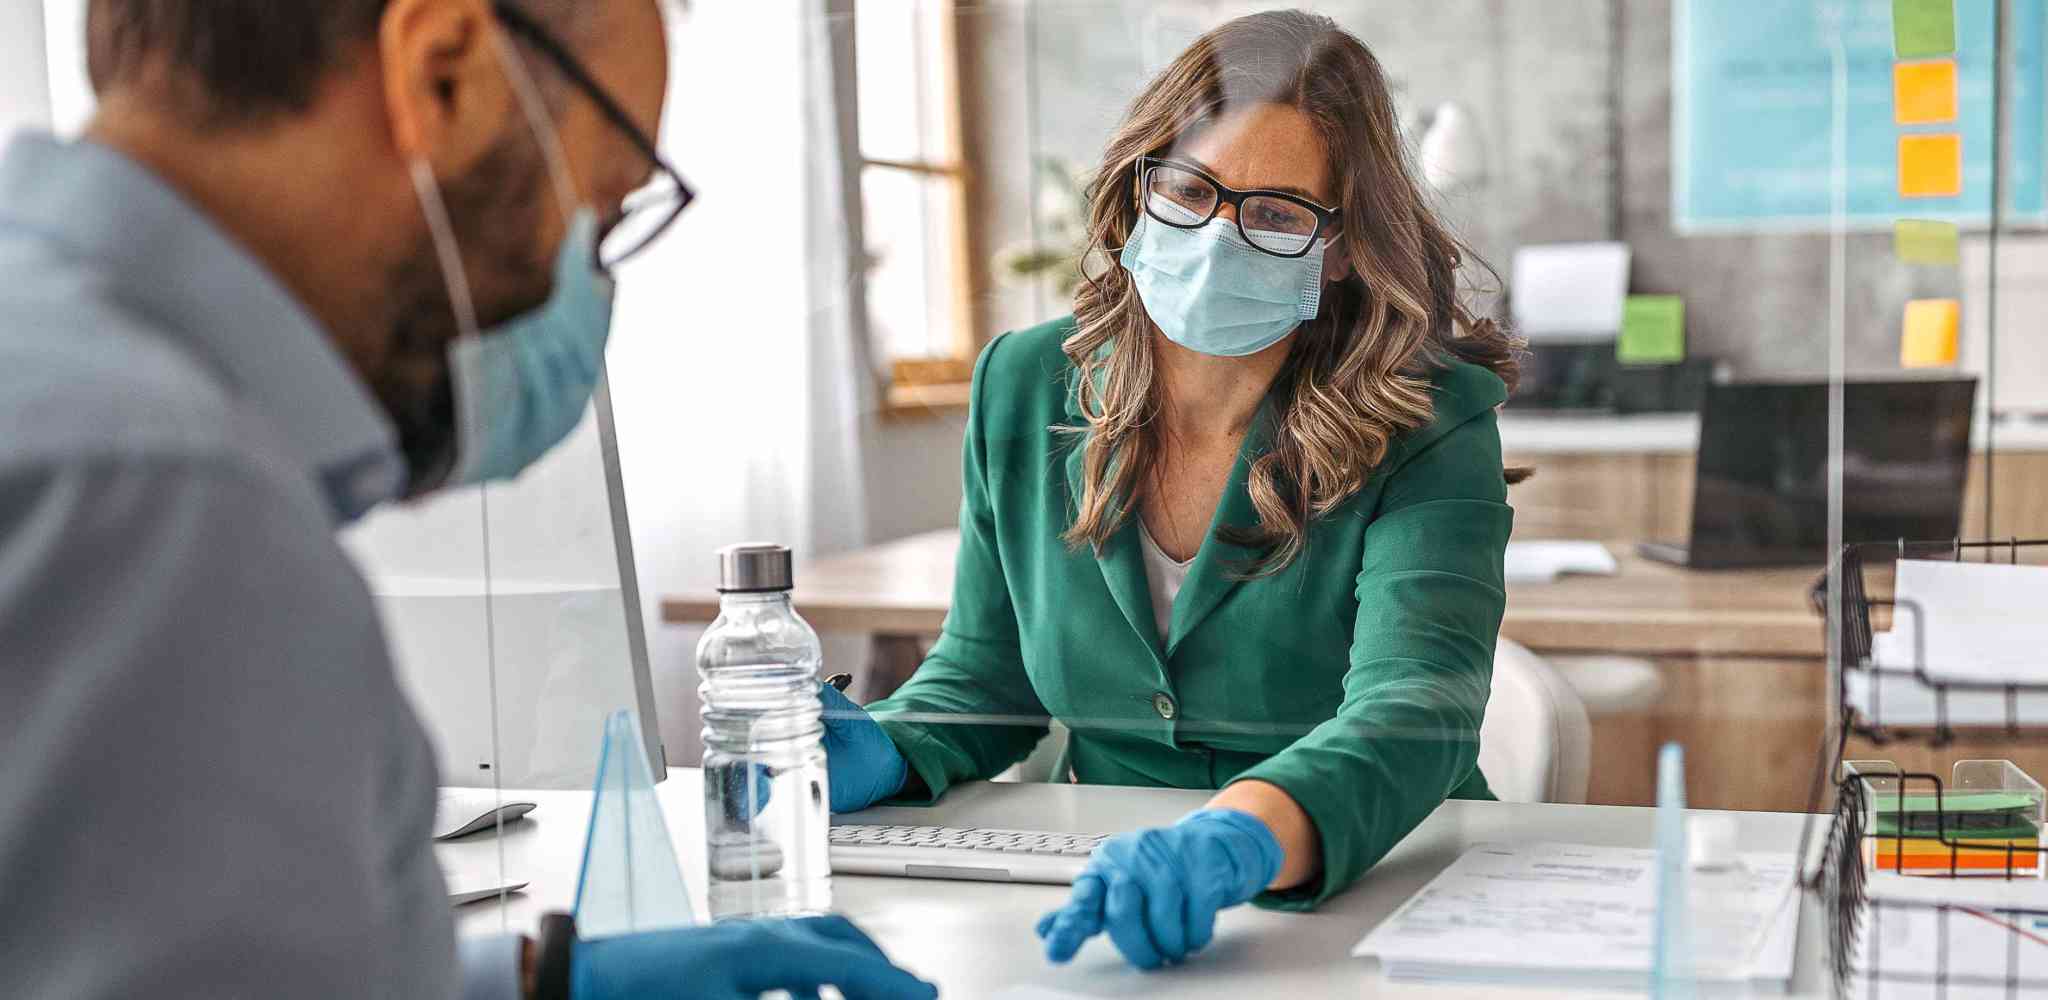 Public health professional wearing protective gloves and face mask. Office with acrylic glass partition on desk. Acrylic glass wall - protection against coughs and spitting, protection against viruses.